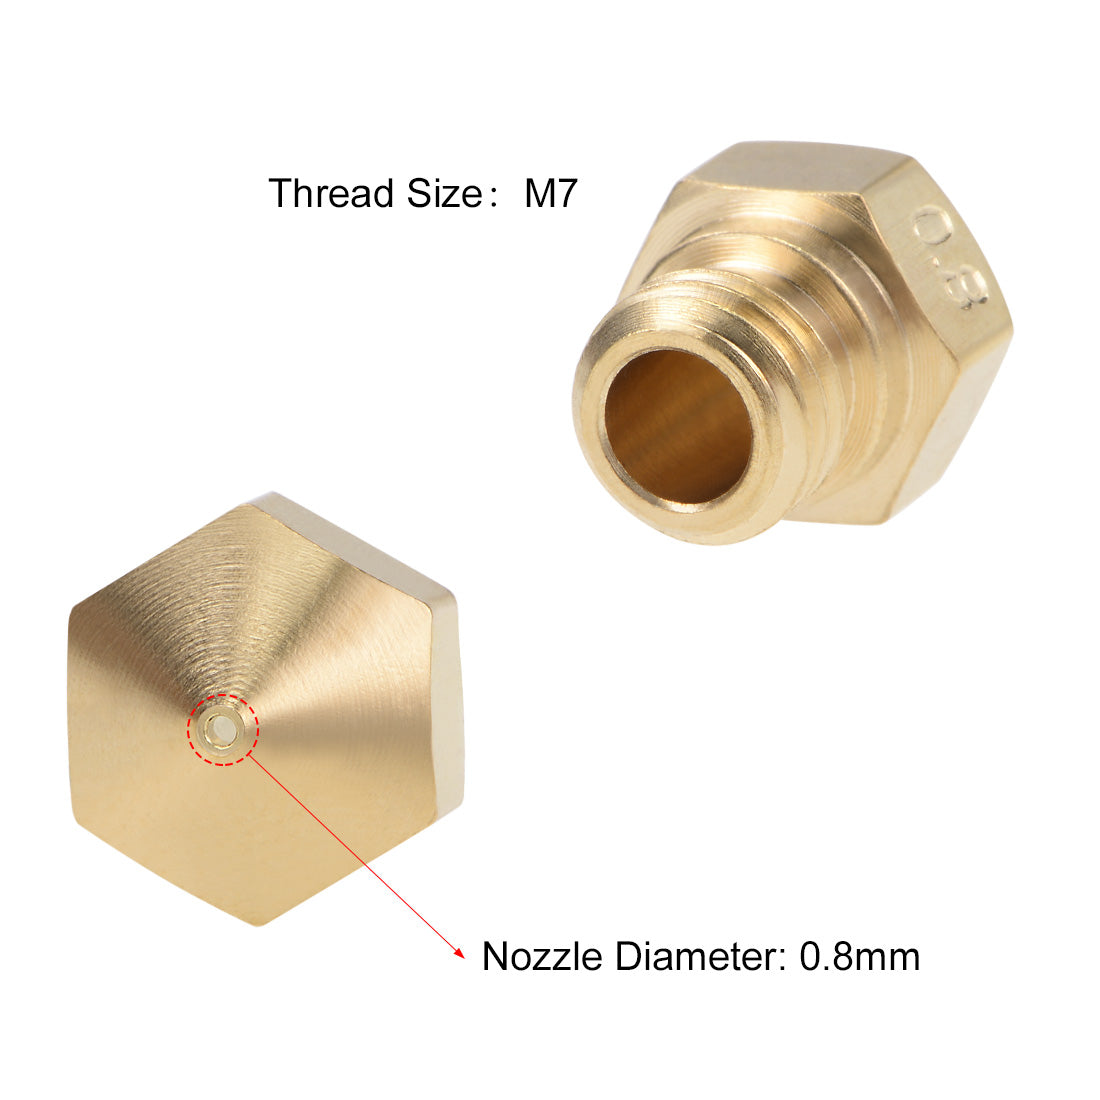 uxcell Uxcell 0.8mm 3D Printer Nozzle Head M7 Thread Replacement for MK10 1.75mm Extruder Print, Brass 5pcs